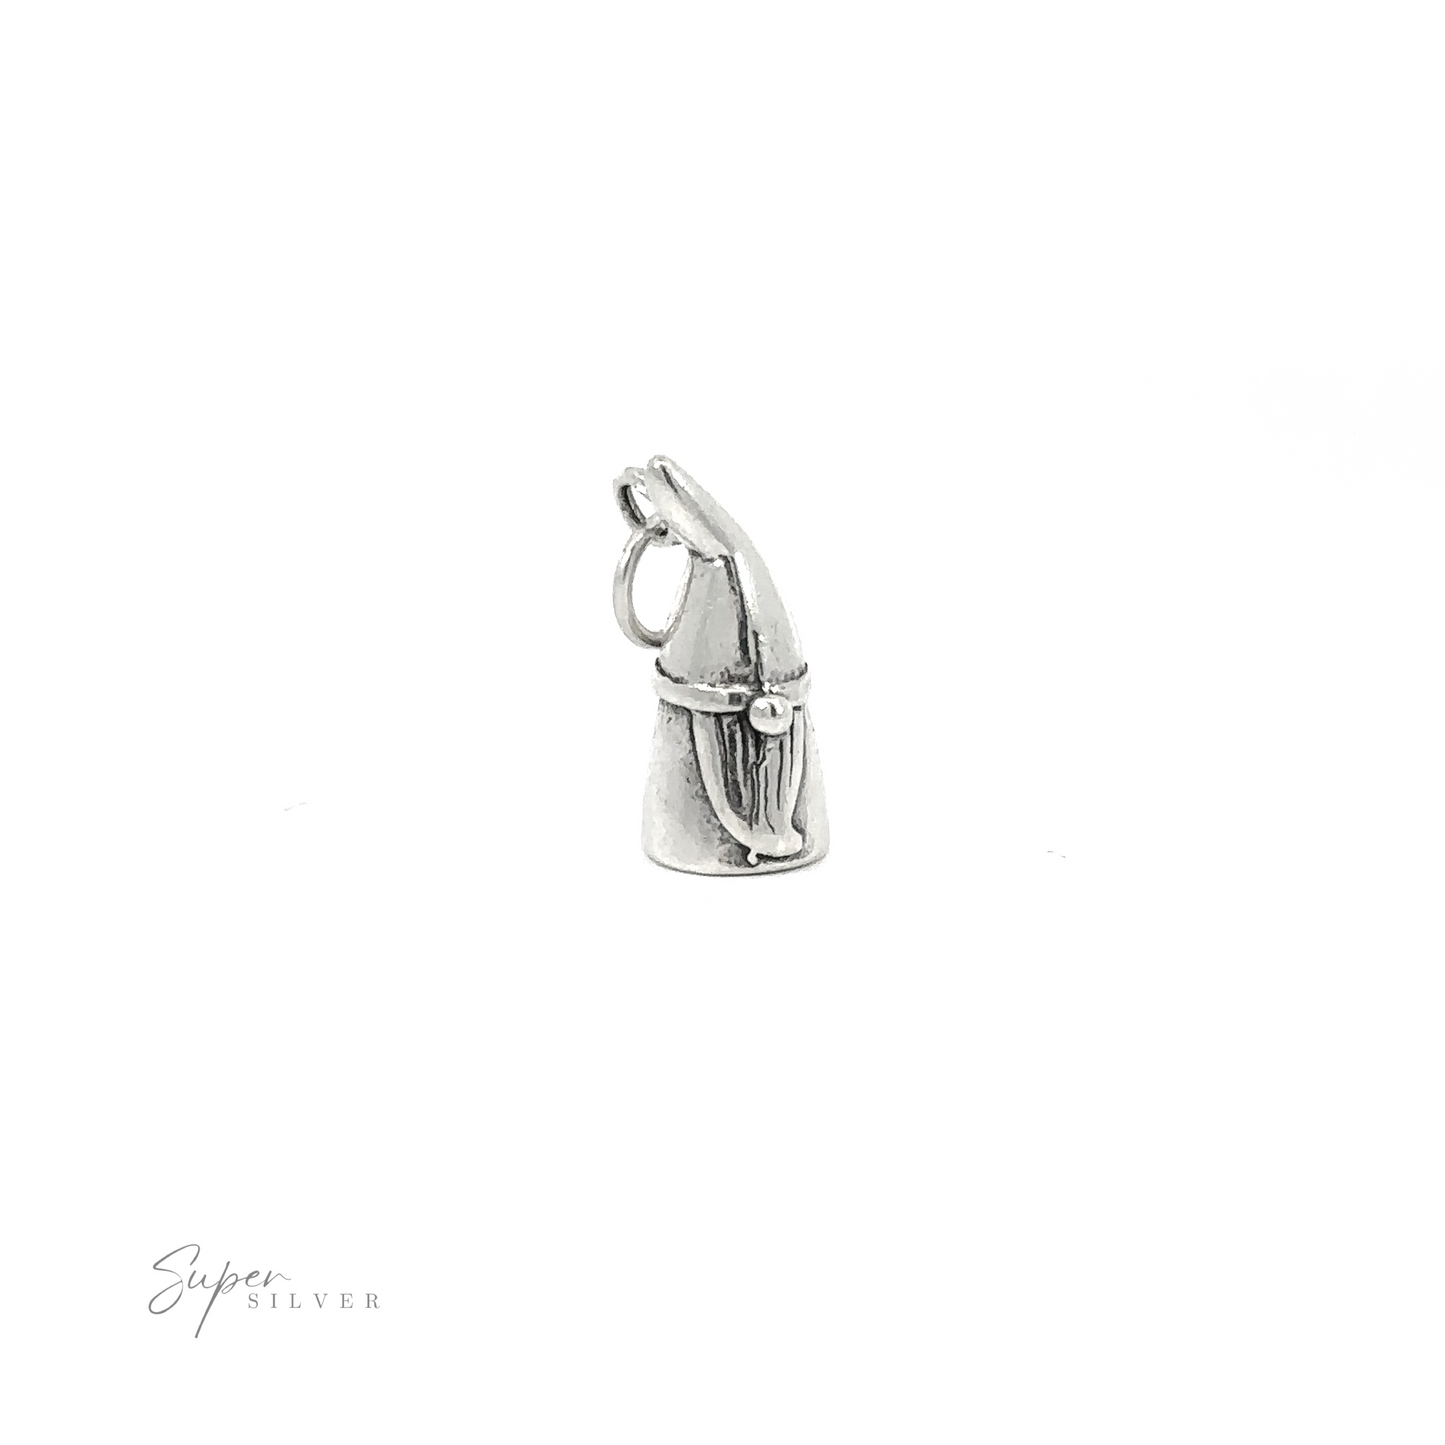 A small Gnome Charm on a white background.